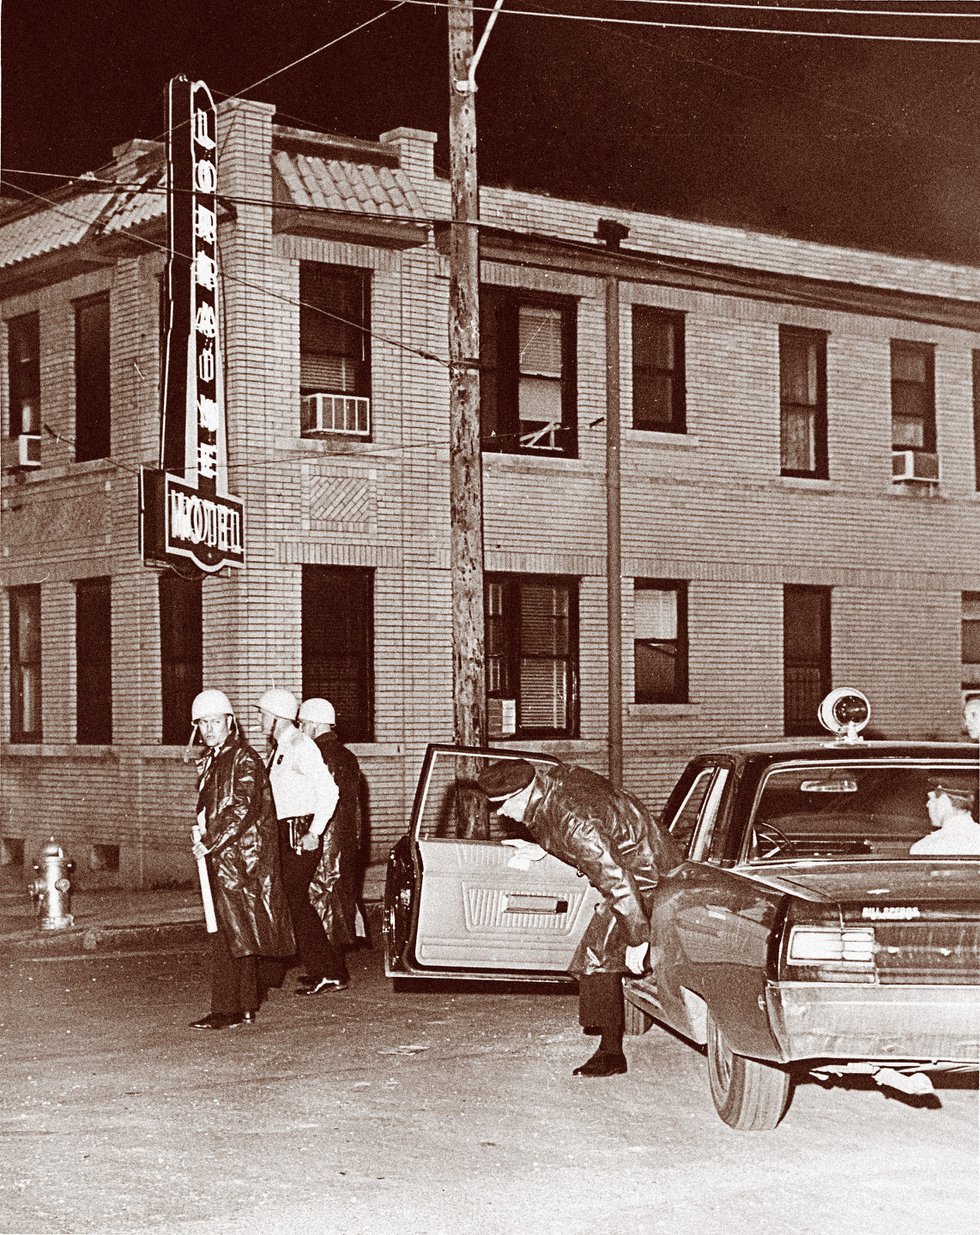 Police arrive at the Lorraine Motel on April 4, 1968.